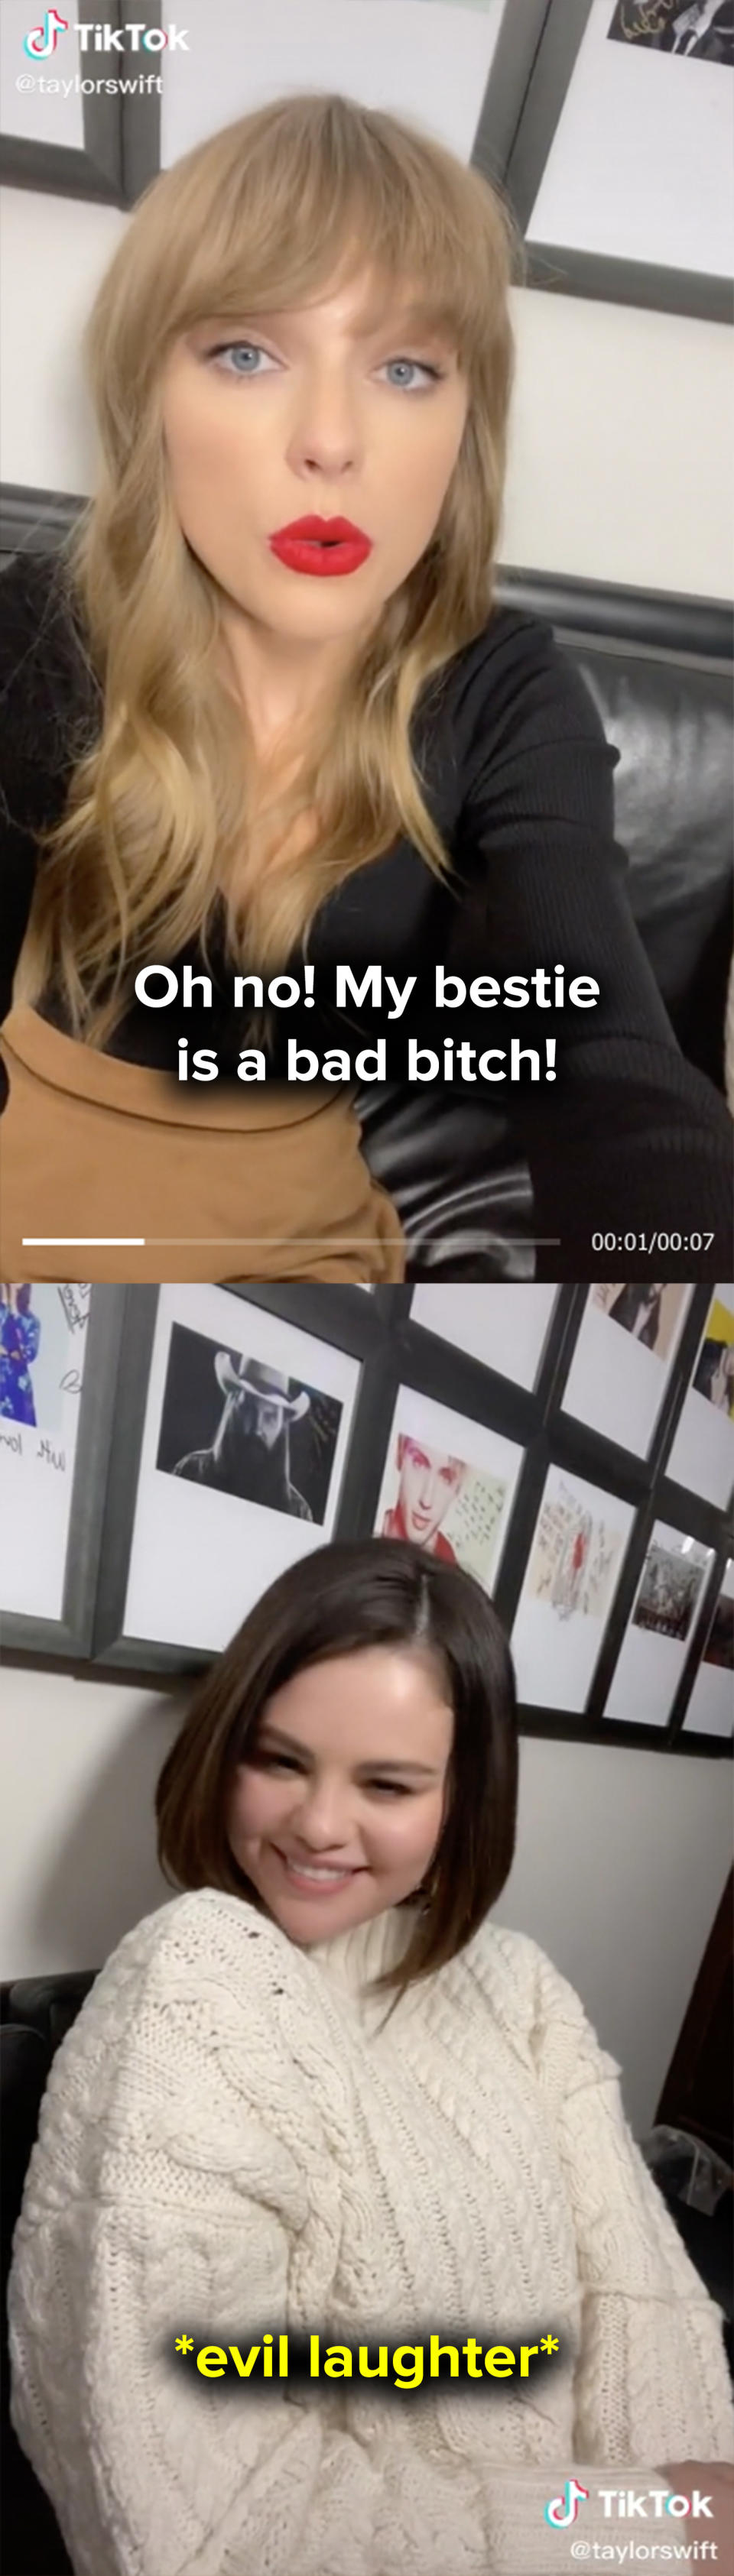 Oh no my bestie is a bad bitch